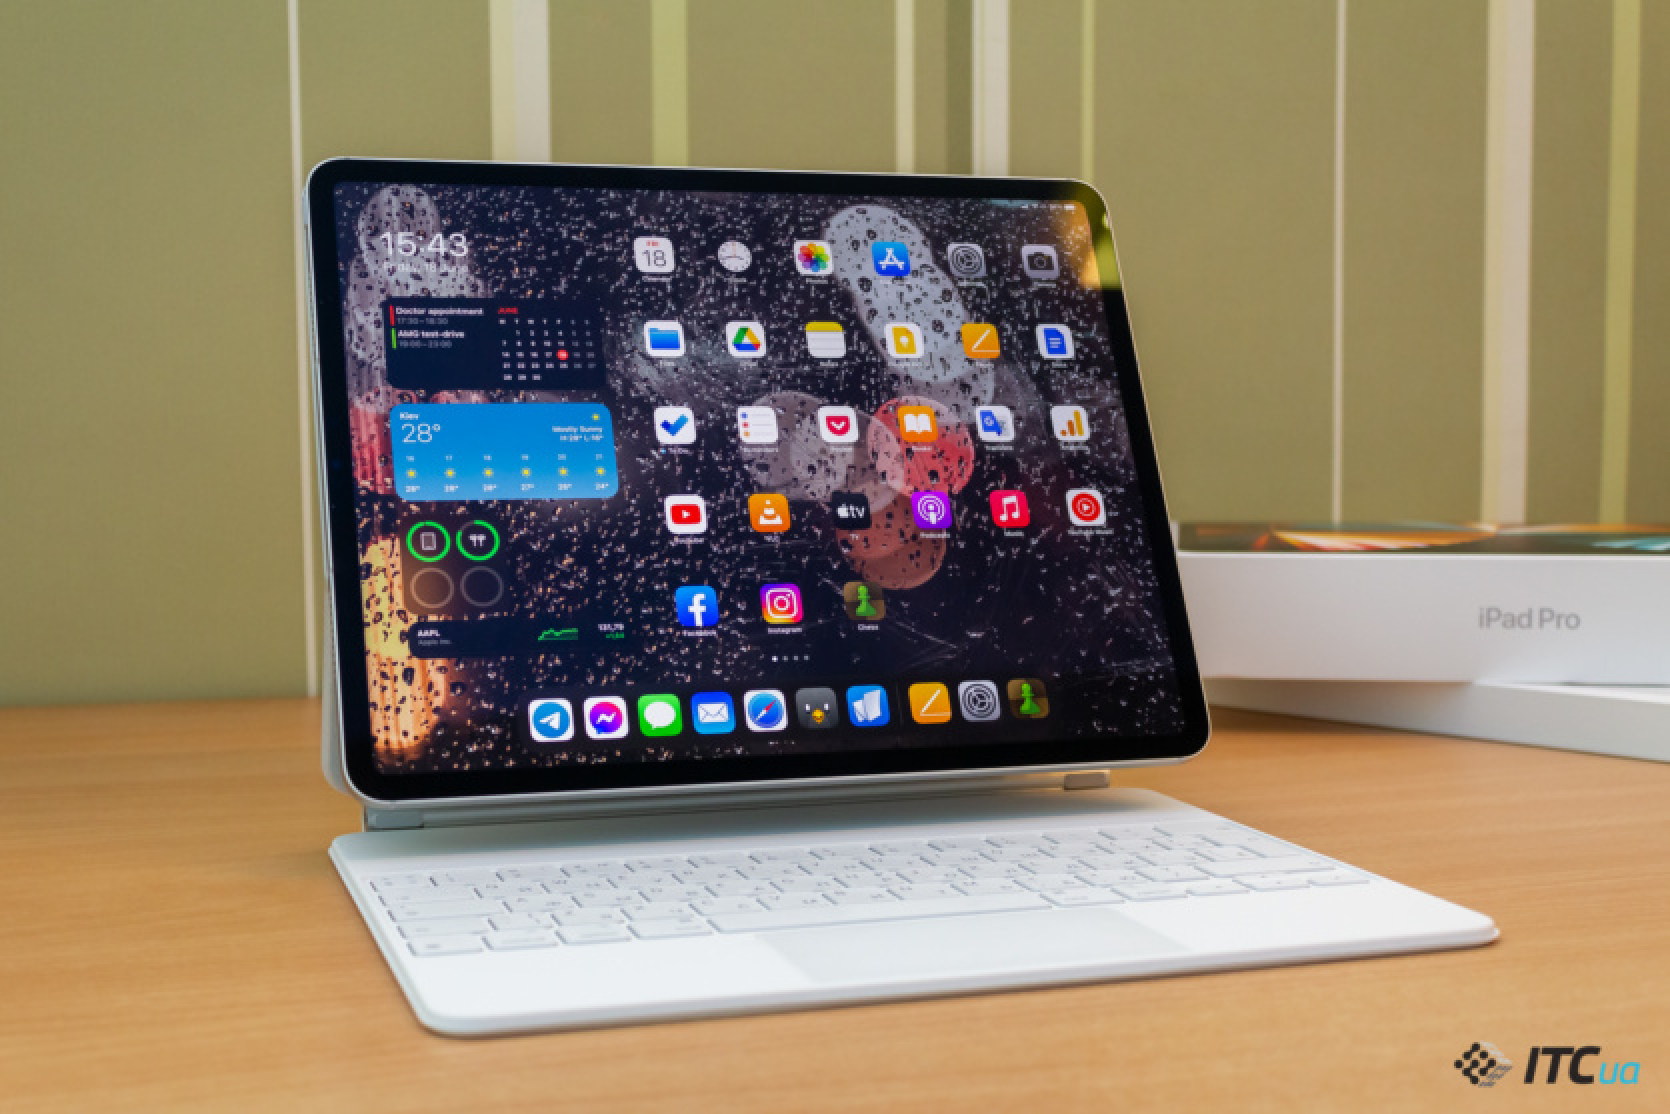 Apple intends to turn the iPad Pro into a true laptop replacement - Mark Gurman